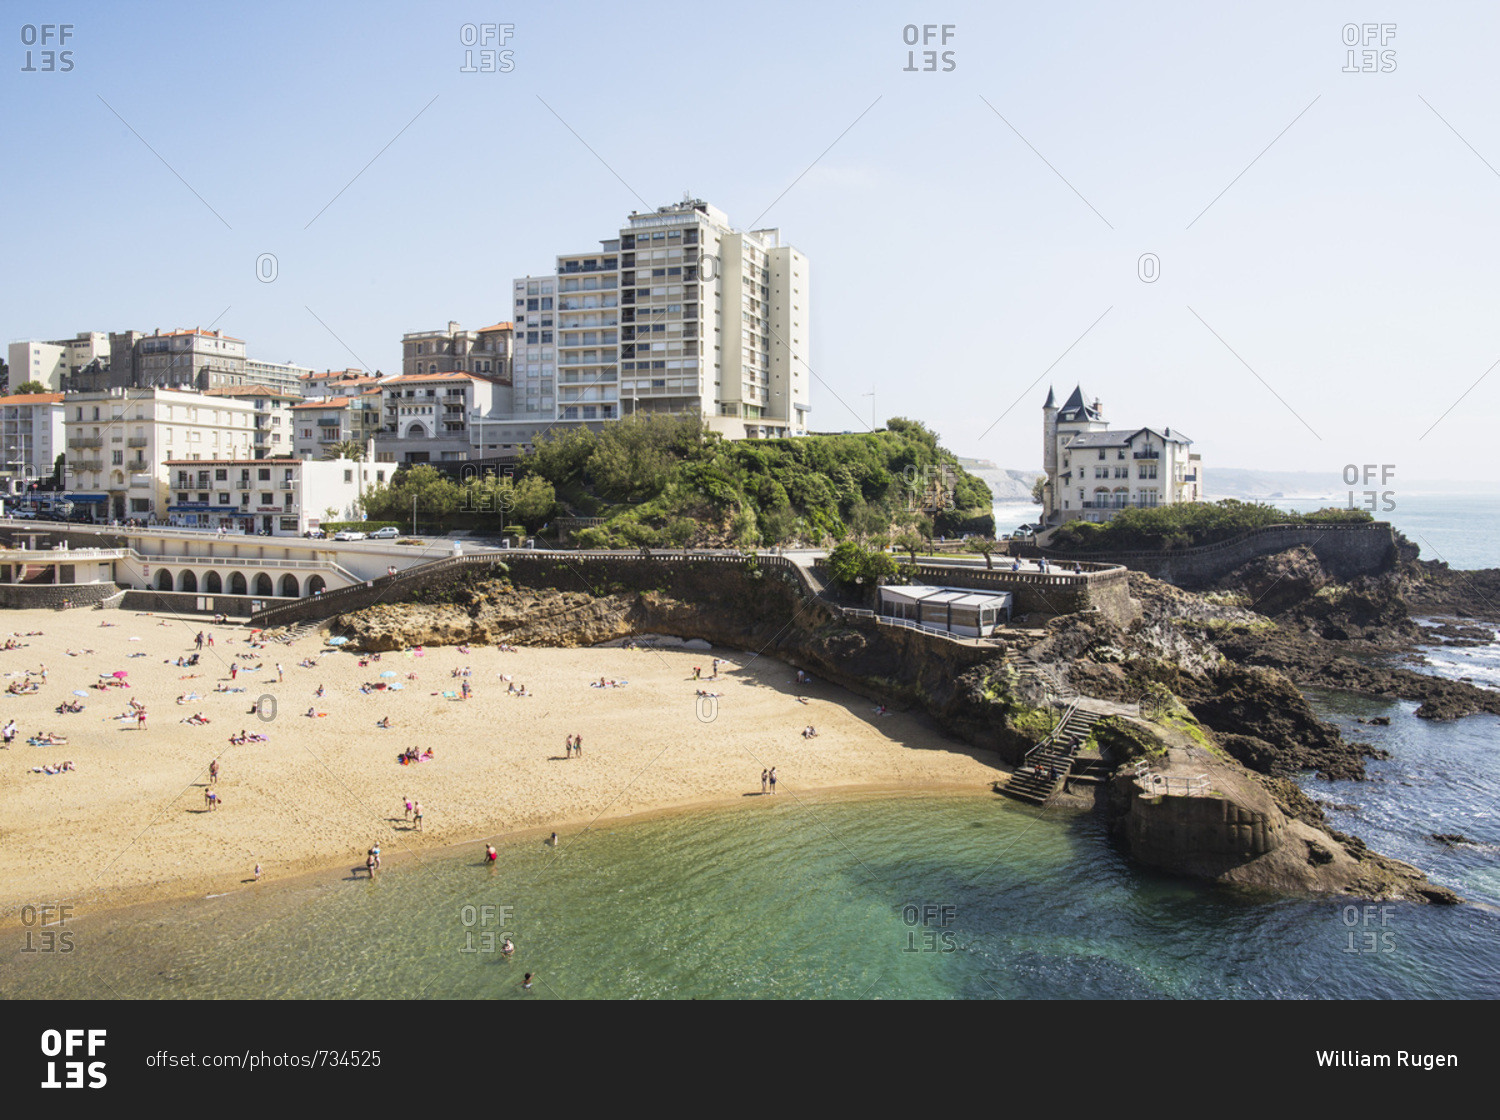 May 22, 2018 People at the beach beach of Port Vieux, Biarritz, France